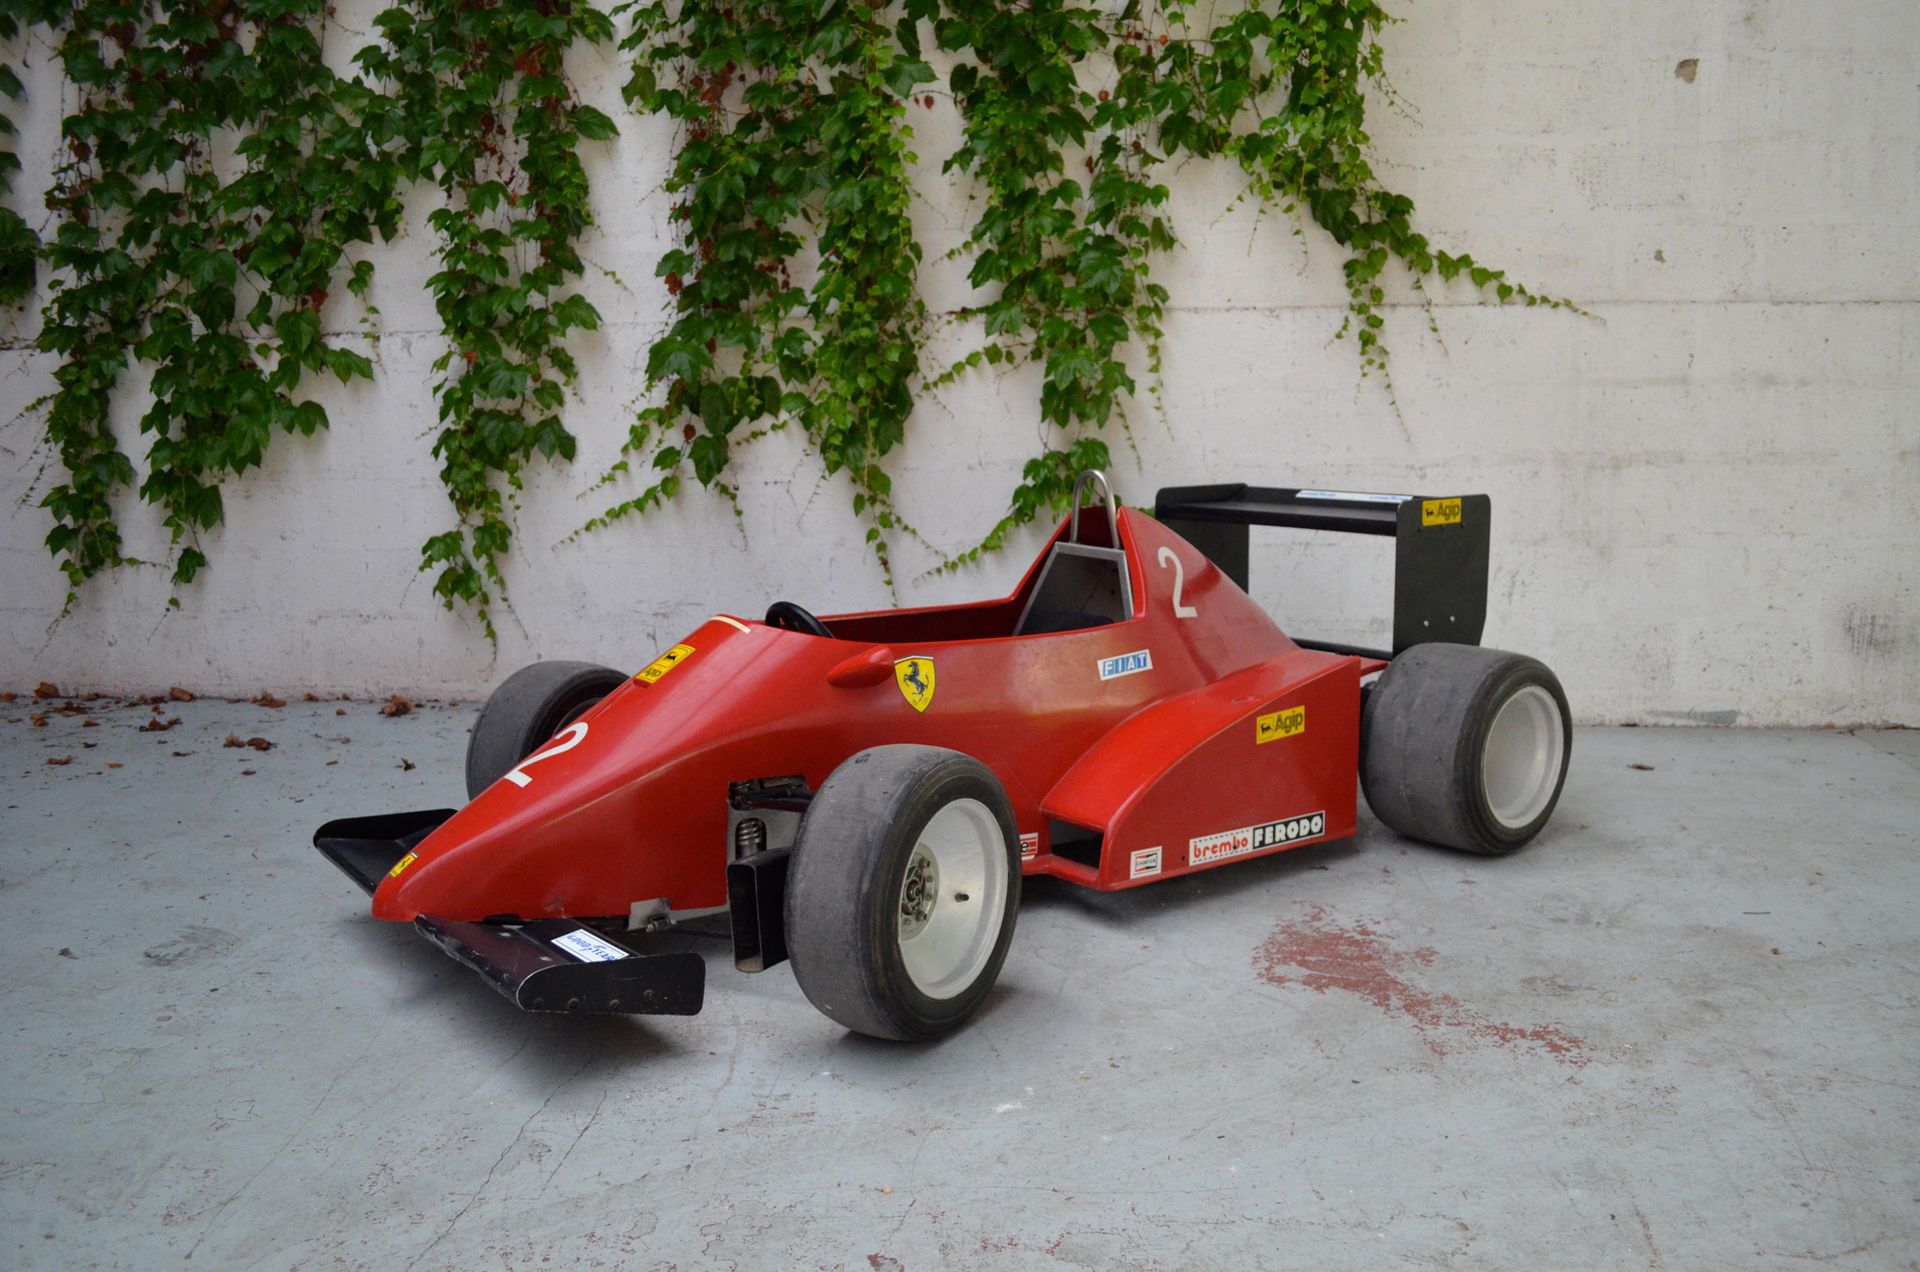 Monoplace Ferrari F1 pour Ferrari F1 single seater for_x000D_


child with therm&hellip;